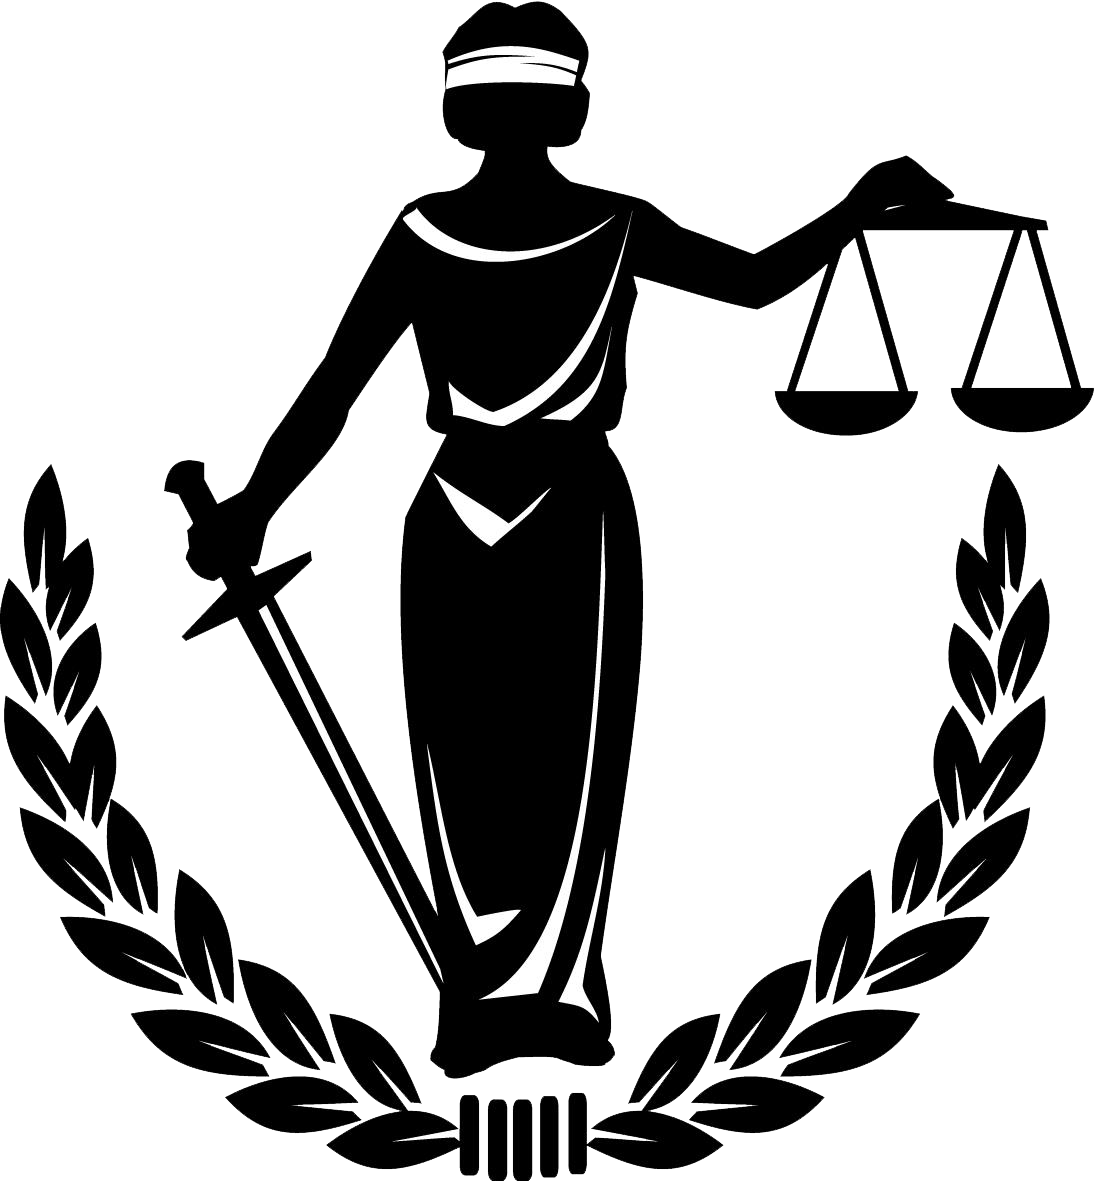 lawyer clipart court justice